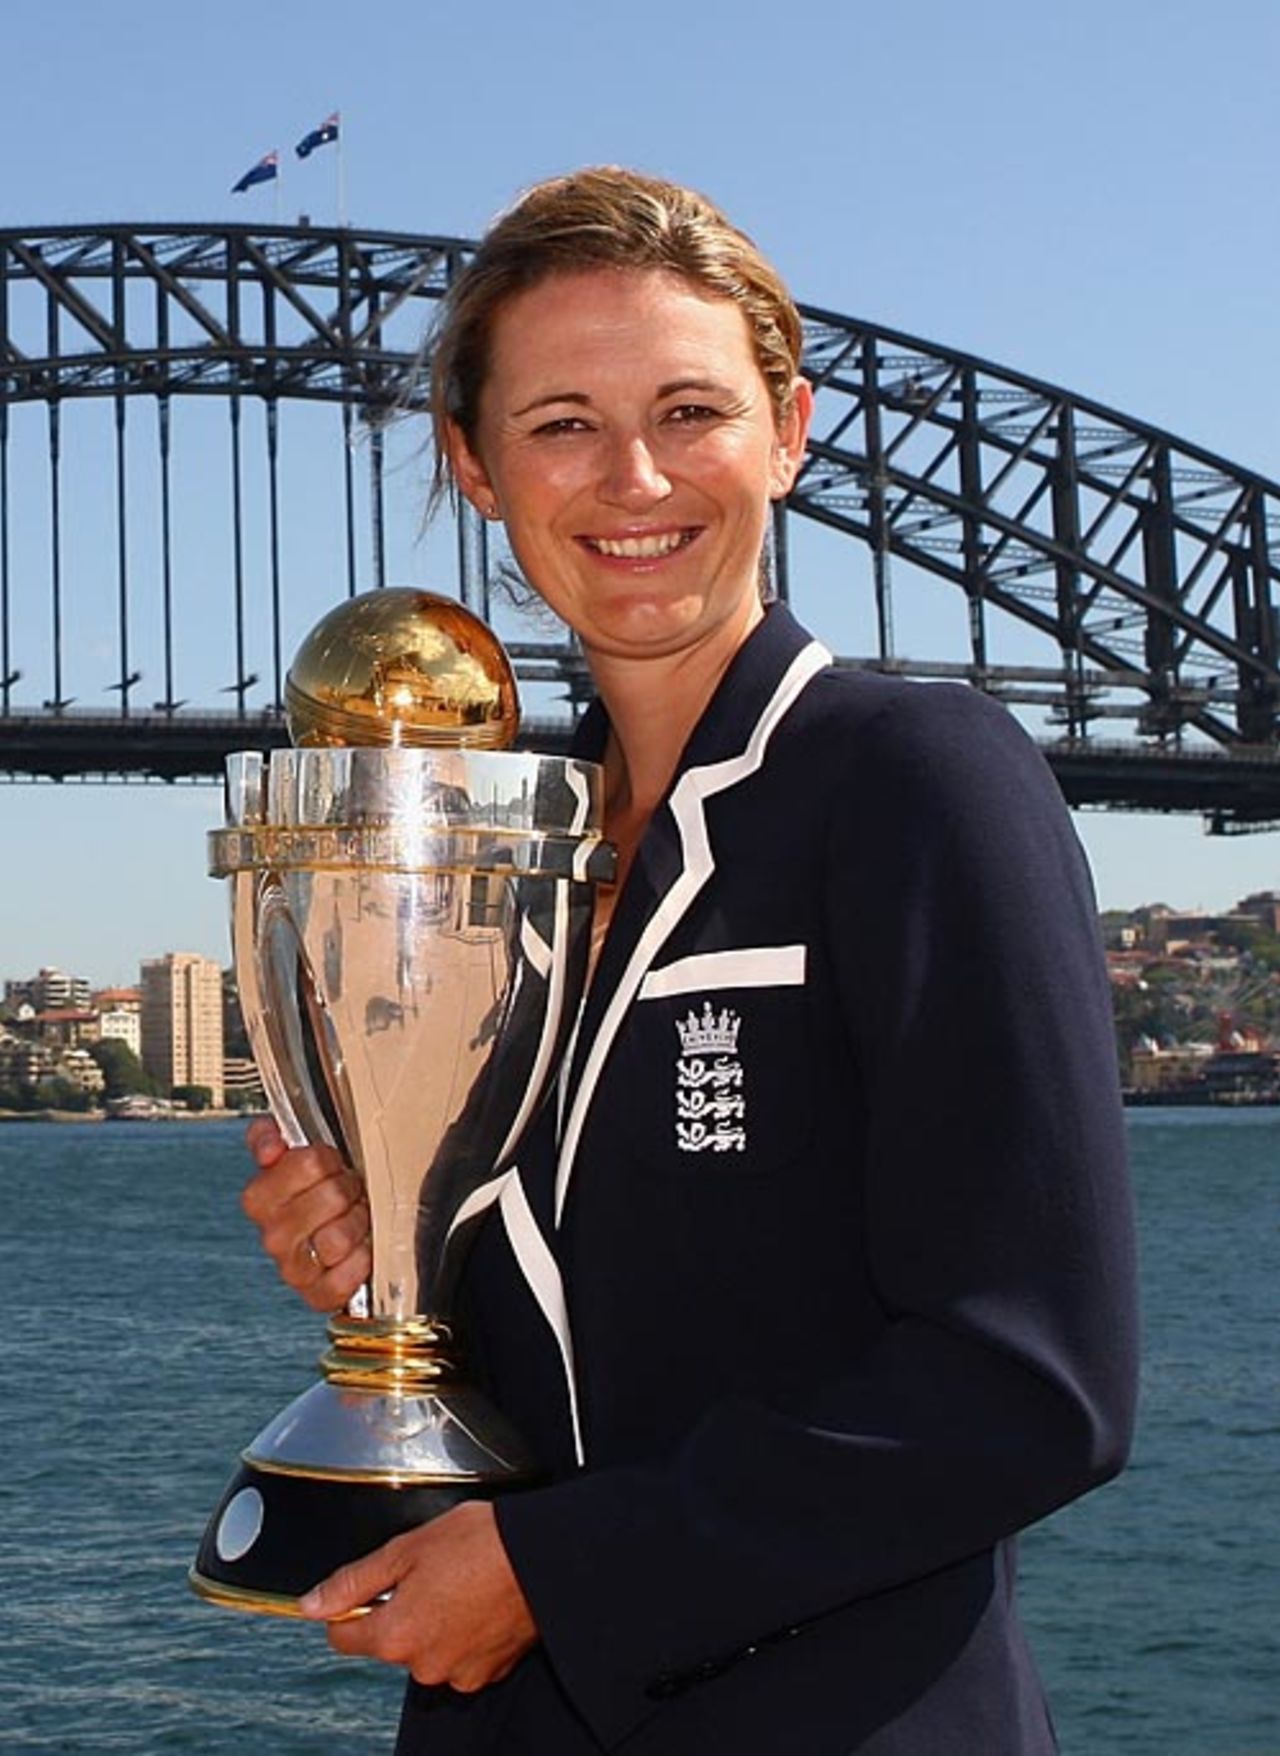 Charlotte Edwards with the trophy, women's World up, Sydney, March 23, 2009